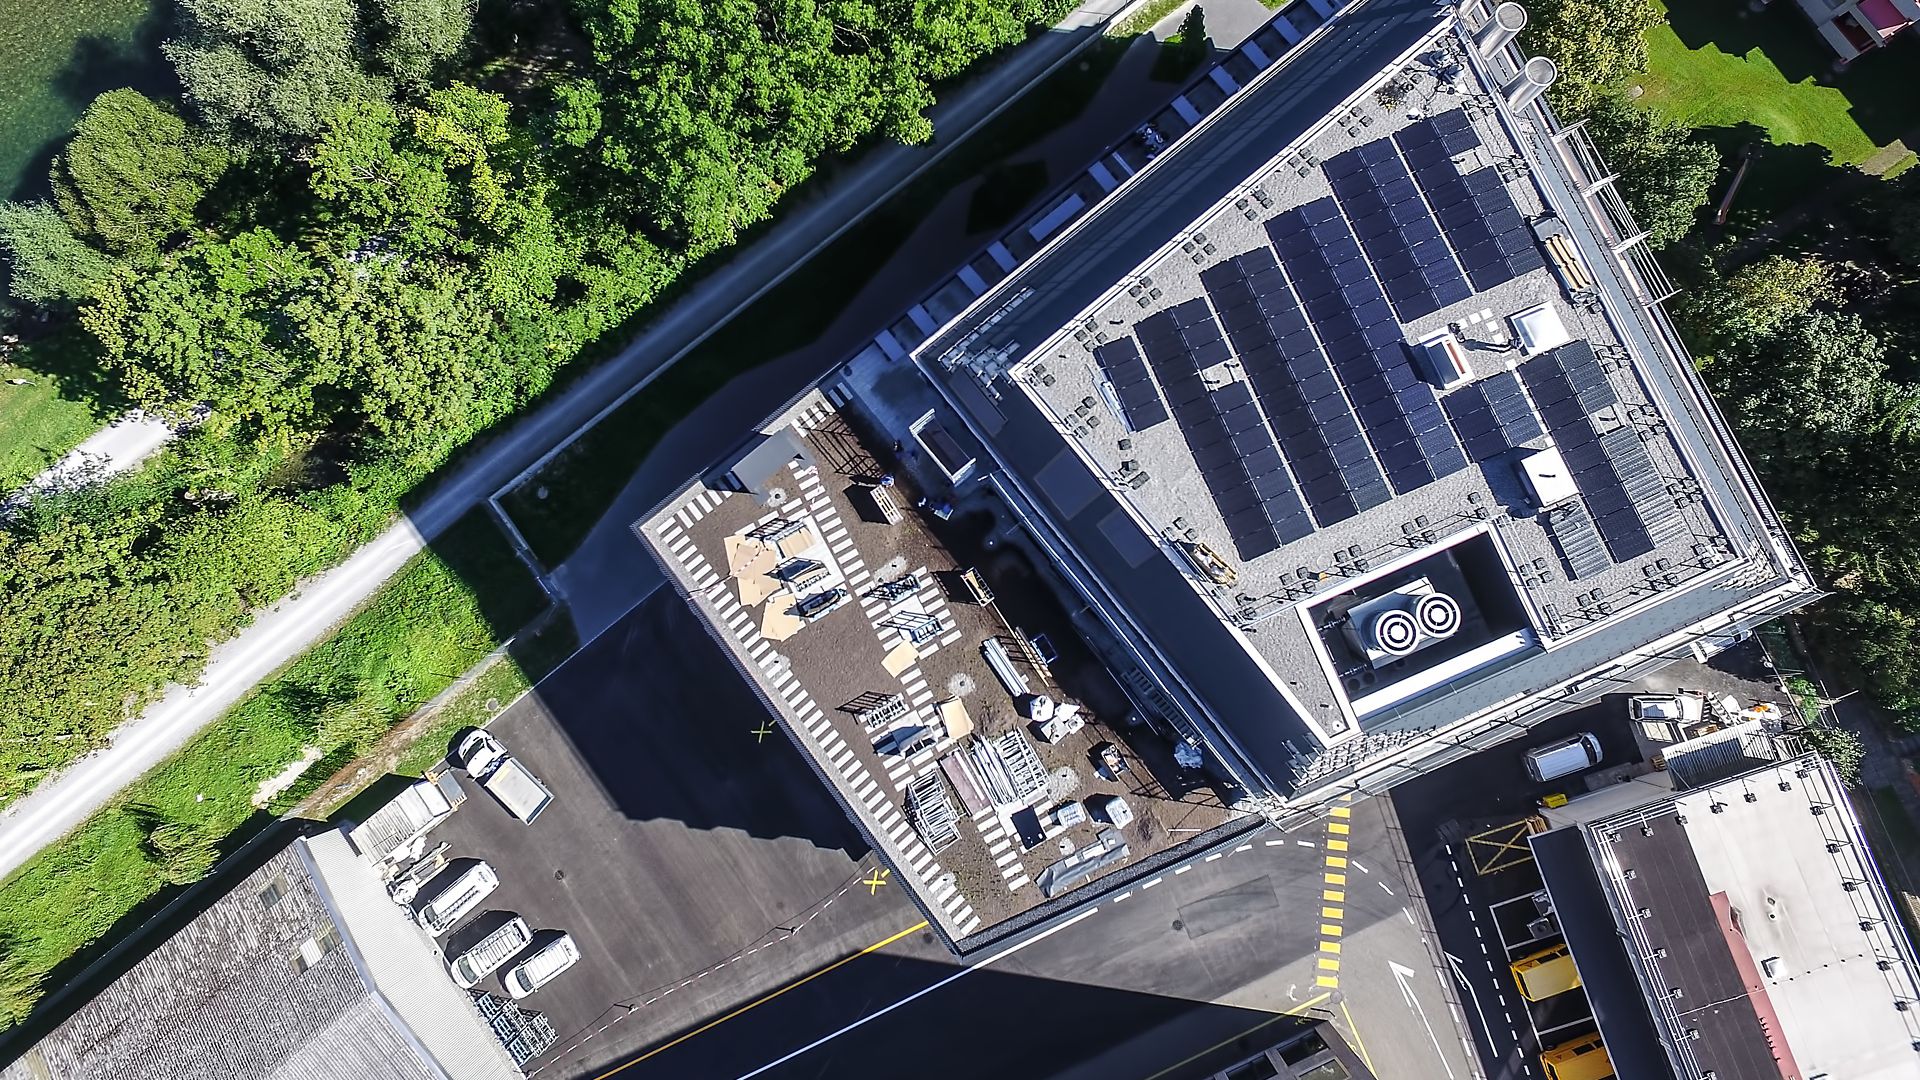 Solar PV panels mounted to roof at Limmat building in Zurich drone view